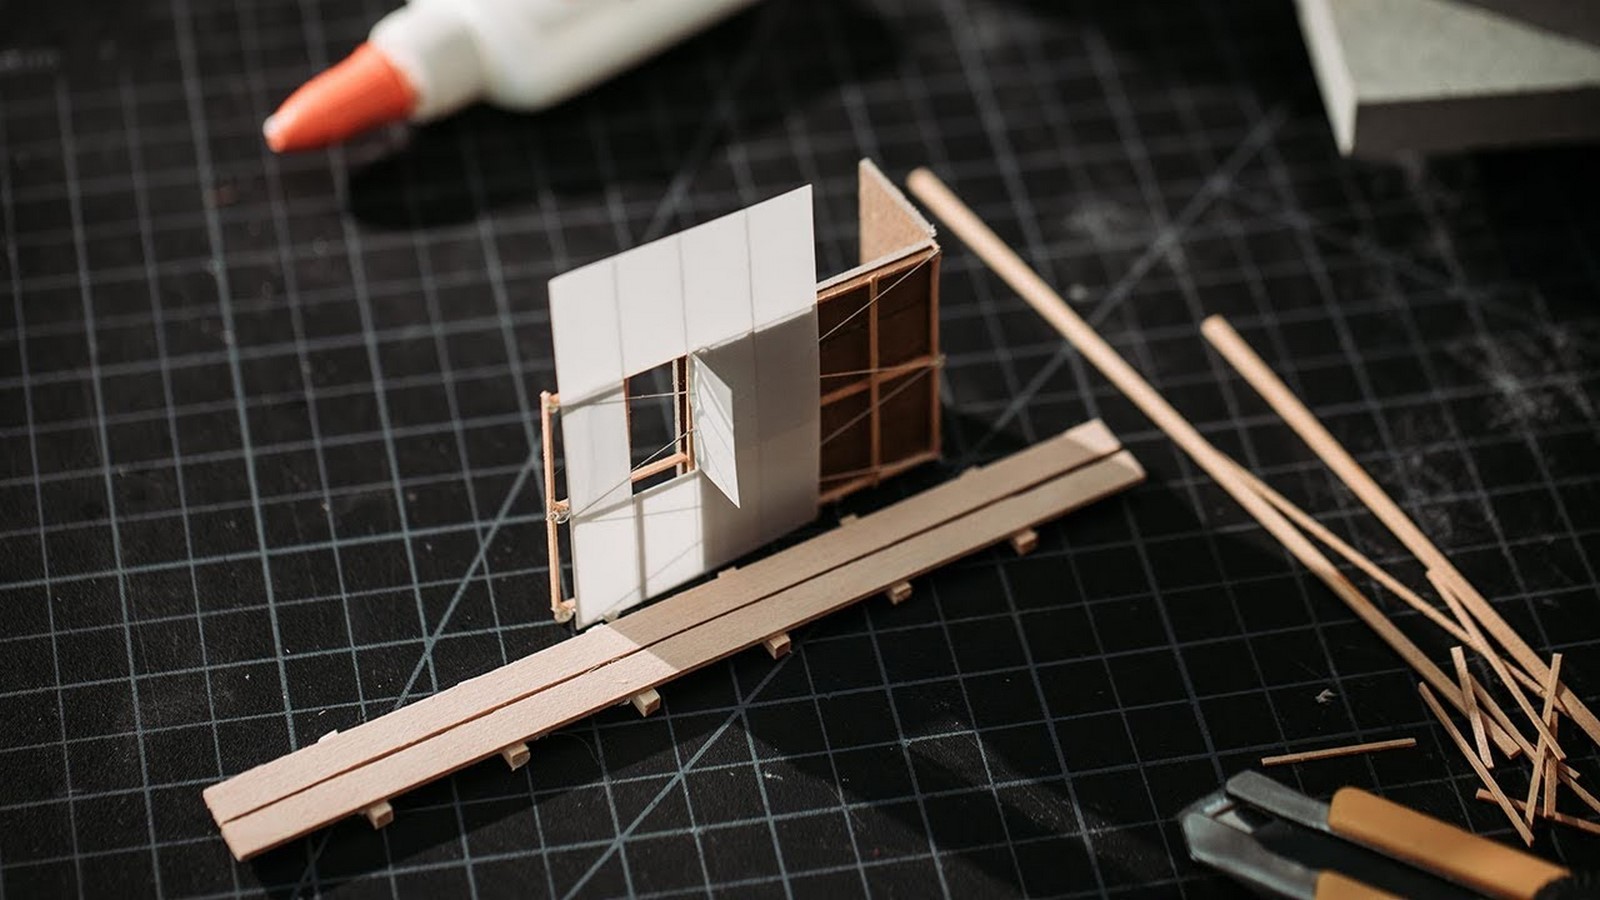 10 Tutorials to learn Model Making in Architecture - Sheet8